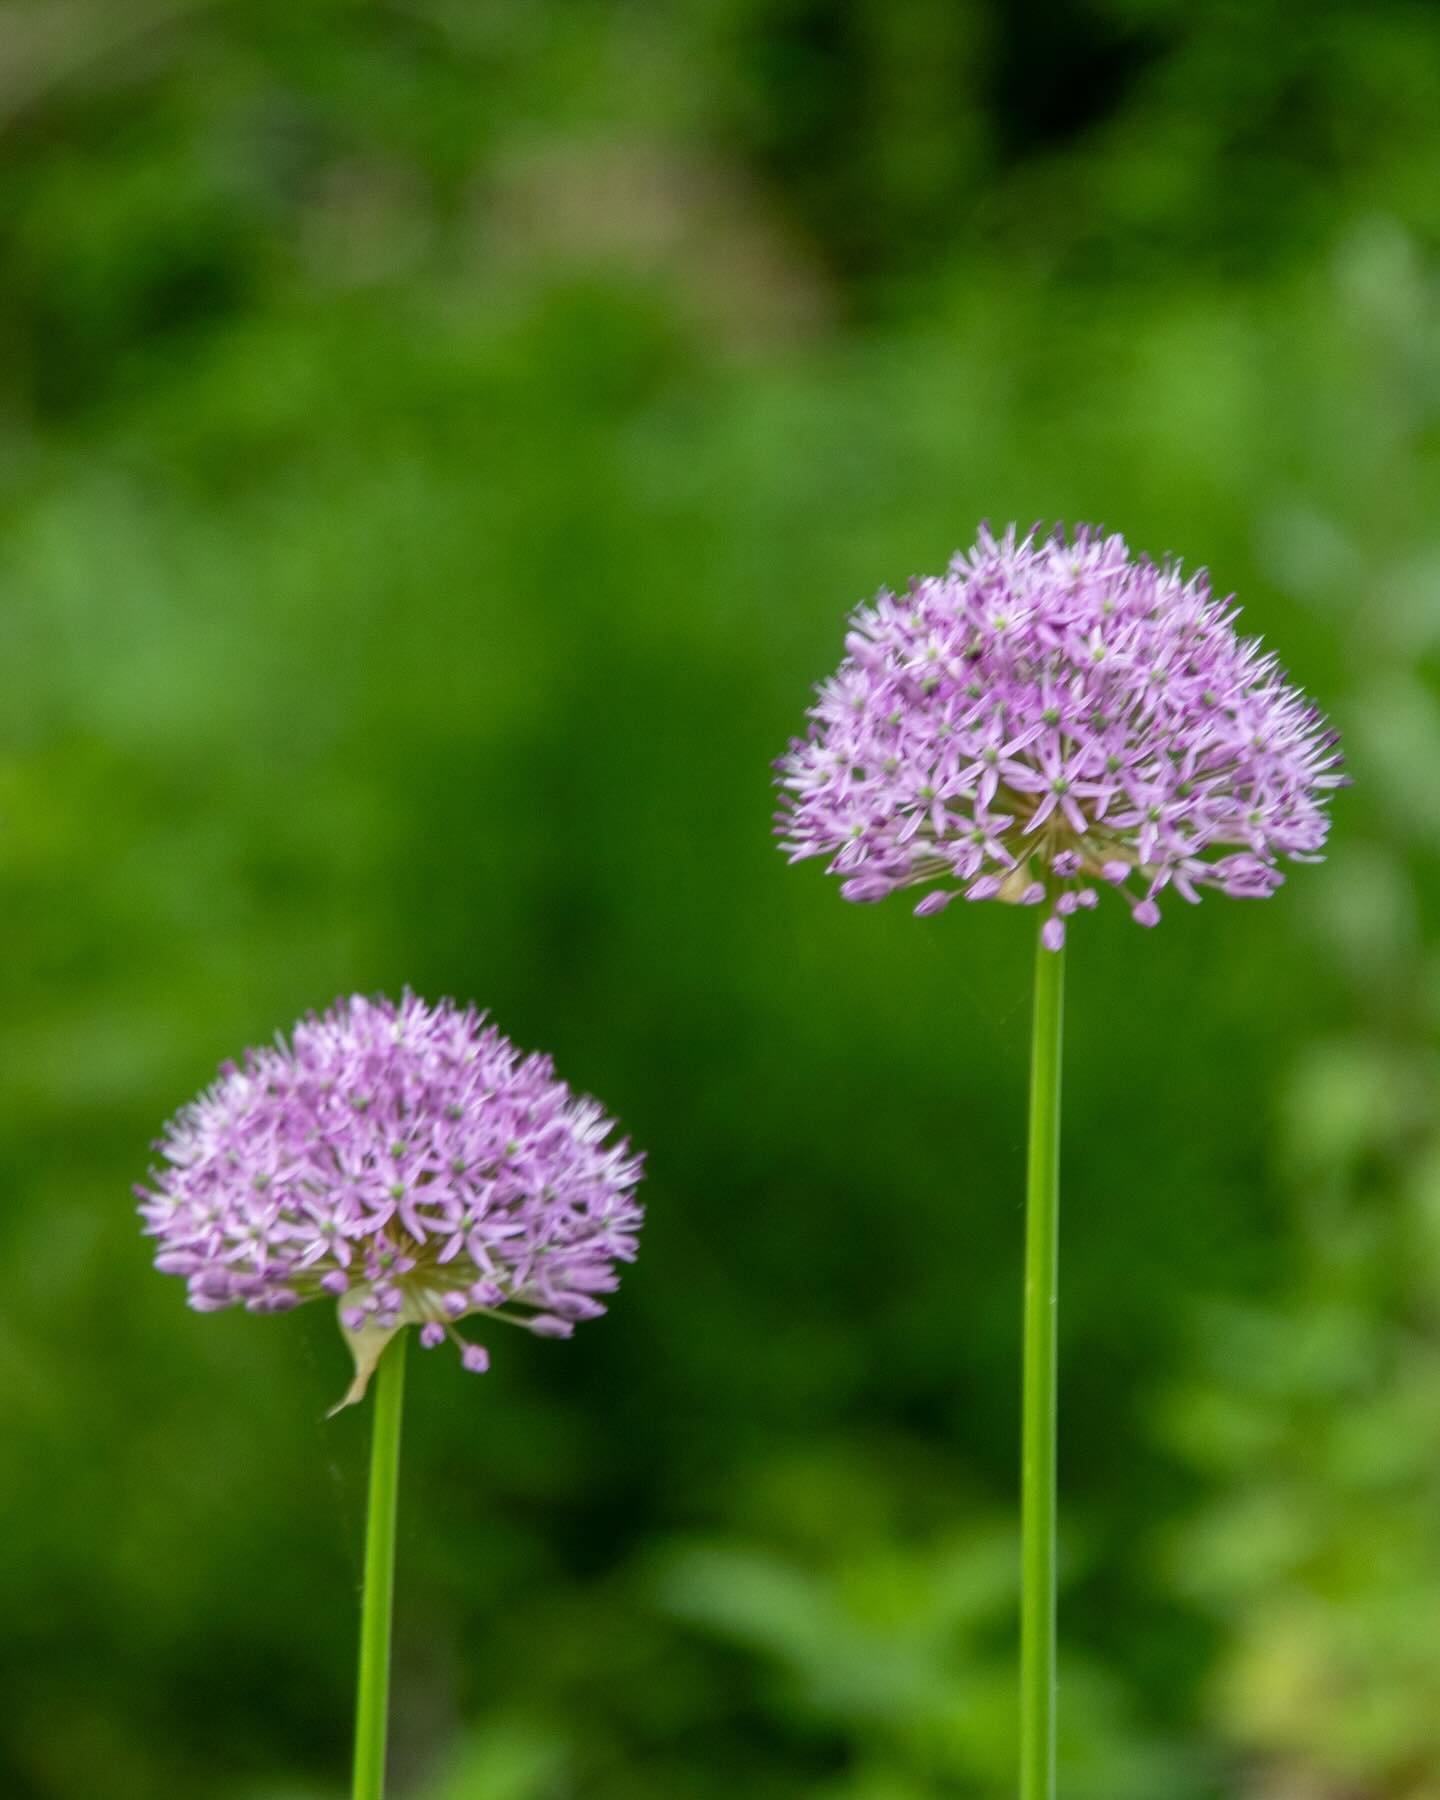 &ldquo;The bees
care for the allium, if you don&rsquo;t &shy;&ndash;
hear them now, doing their research,
humming the arias
of a honey opera&hellip;&rdquo;